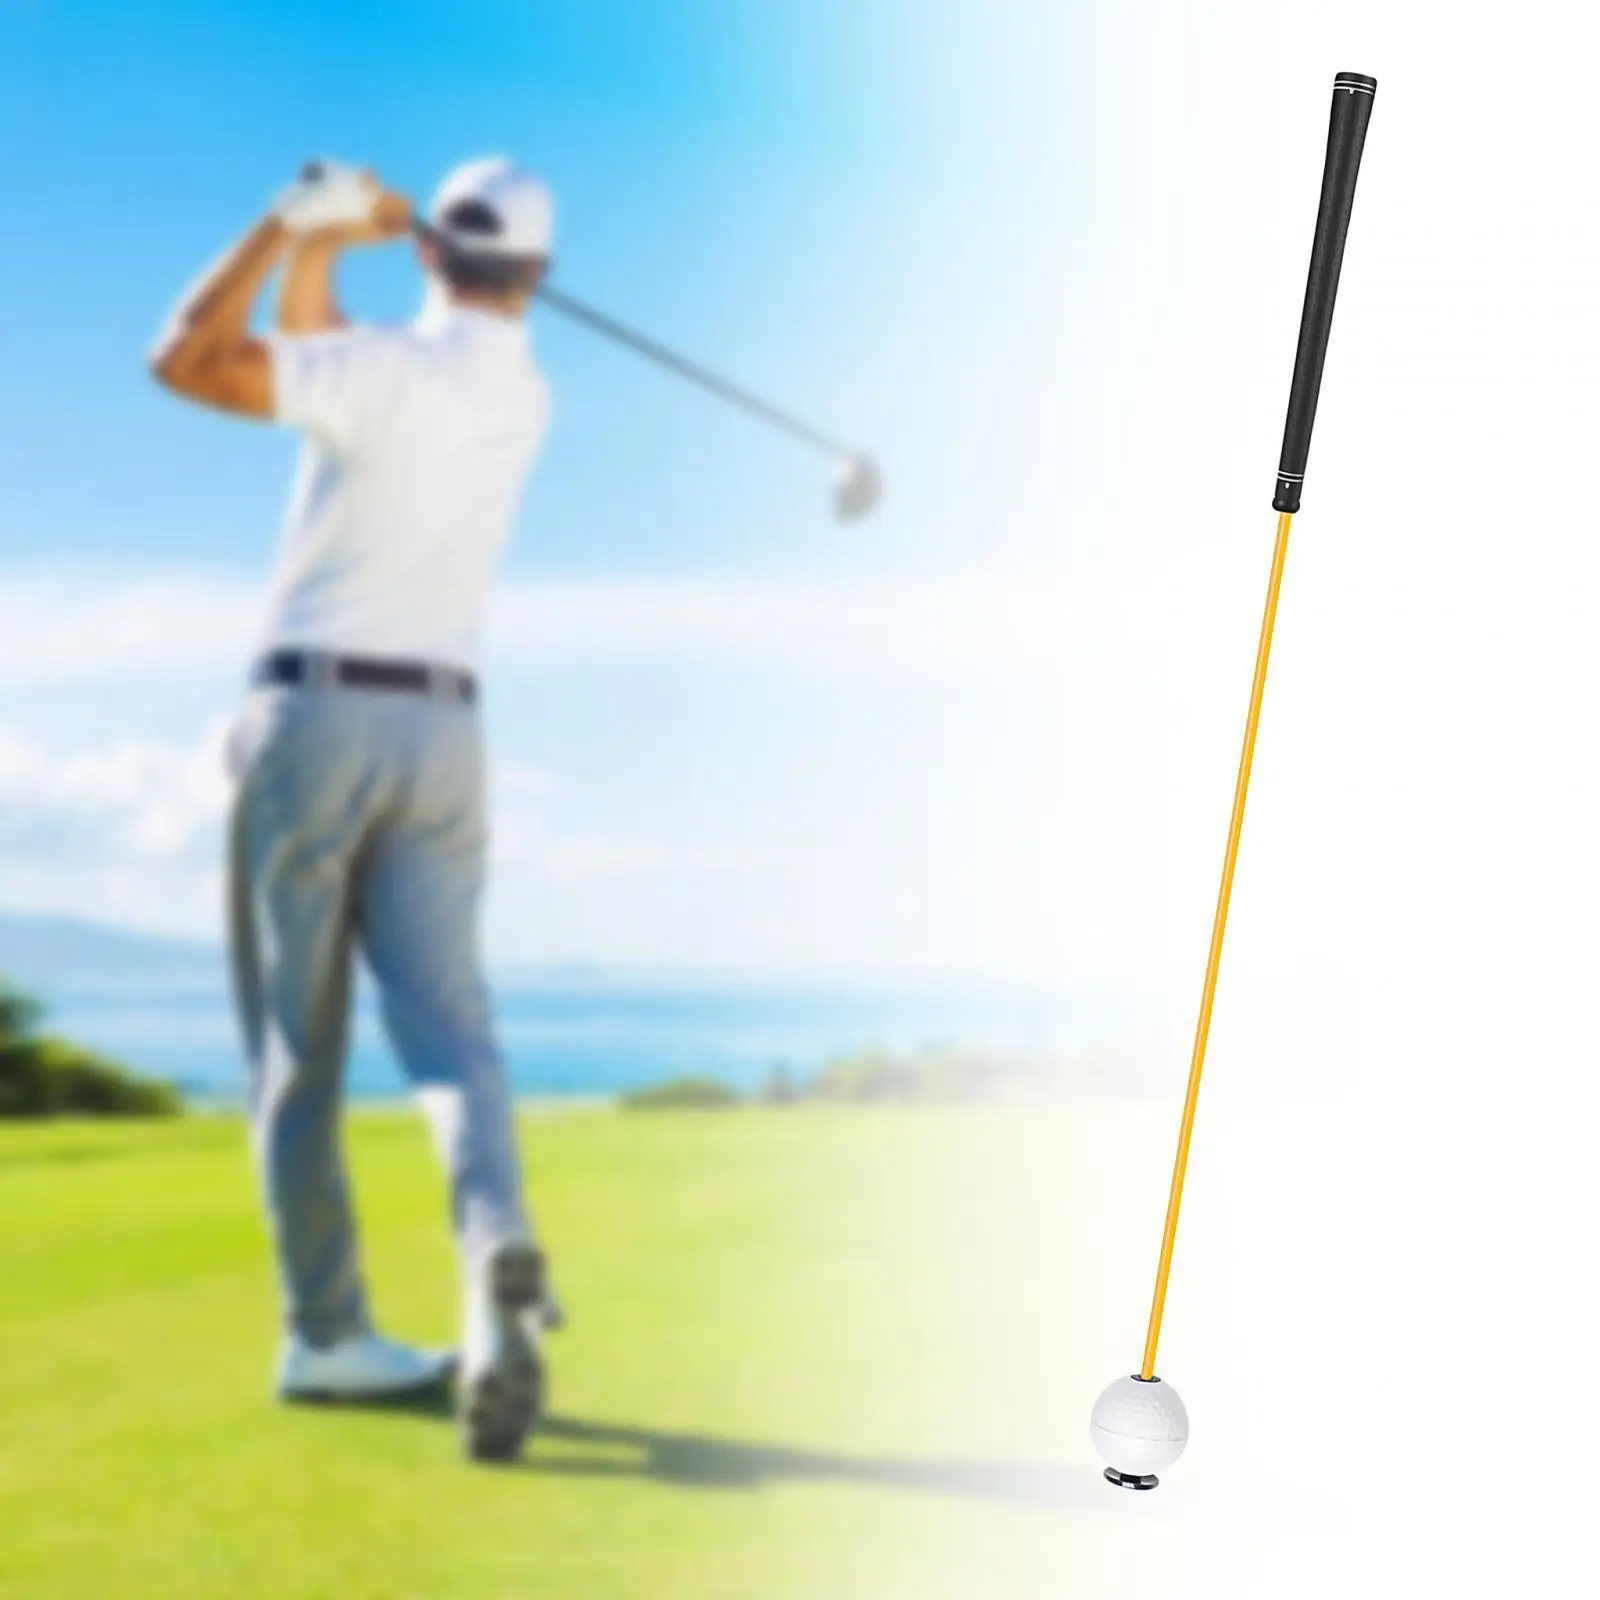 Golf Swing Trainer Comfortable Grip for Beginners Golf Practice Sticks for Flexibility Speed Balance Tempo Position Correction